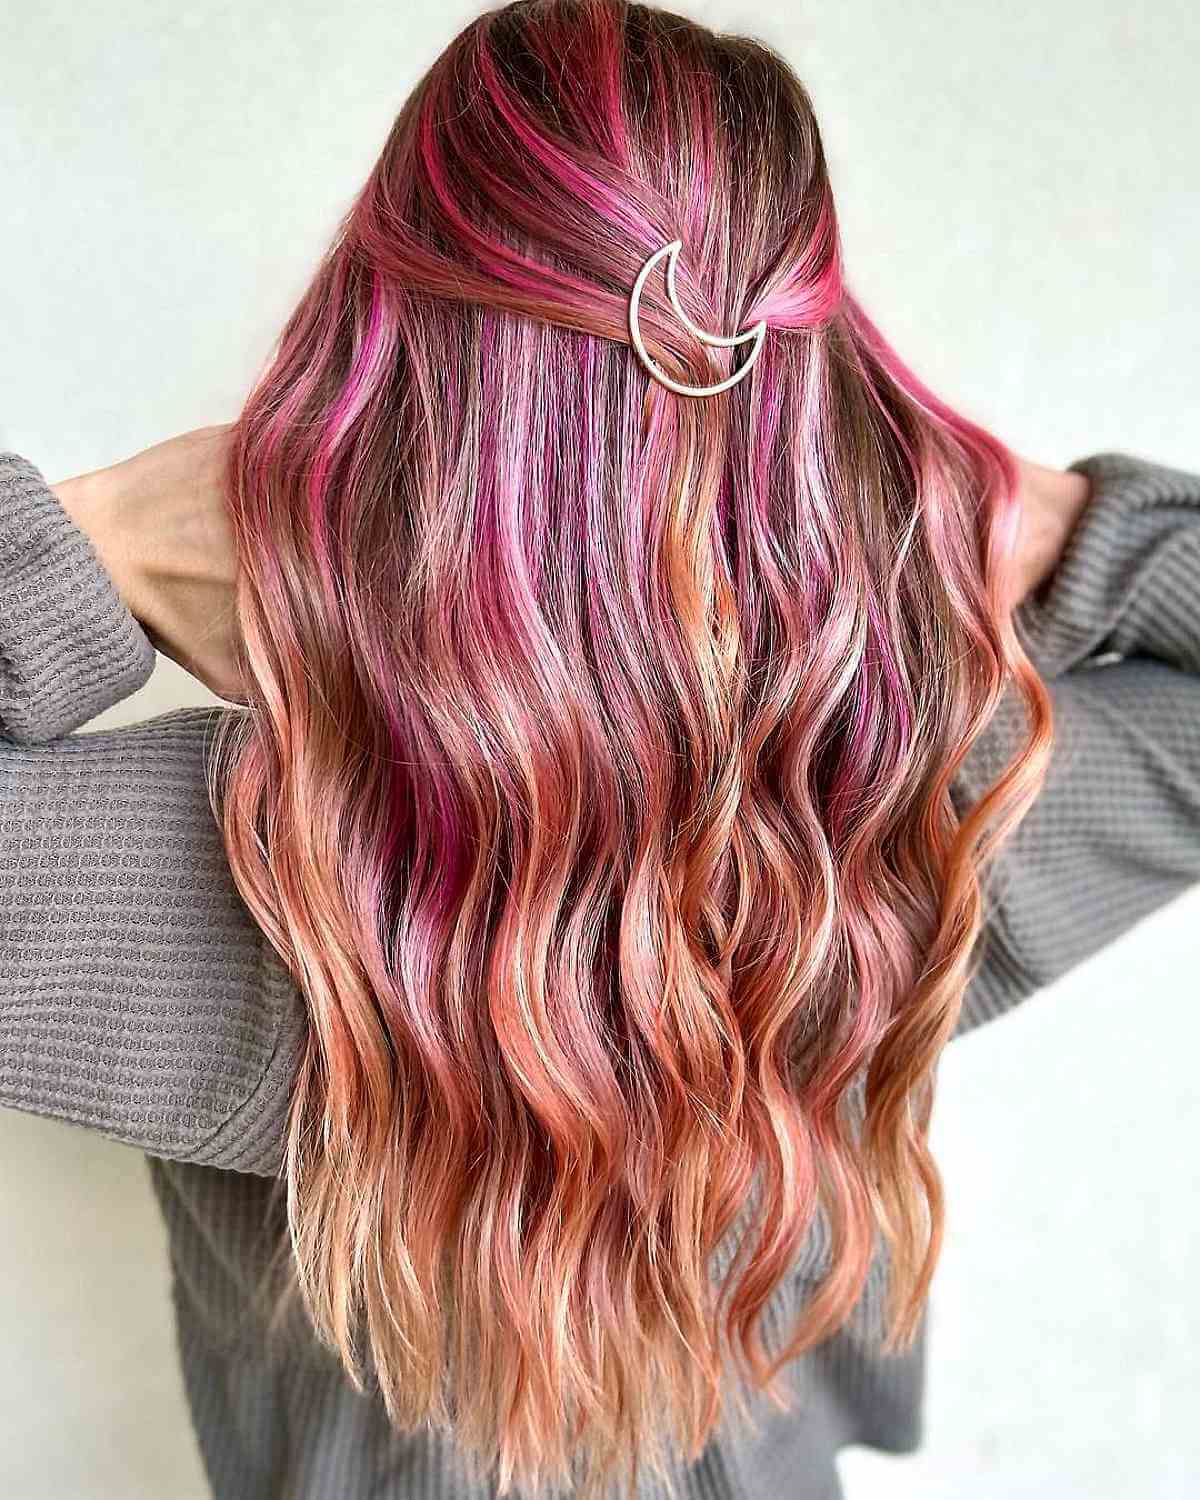 Sunset-Inspired Pink and Orange Waves Color Ideas